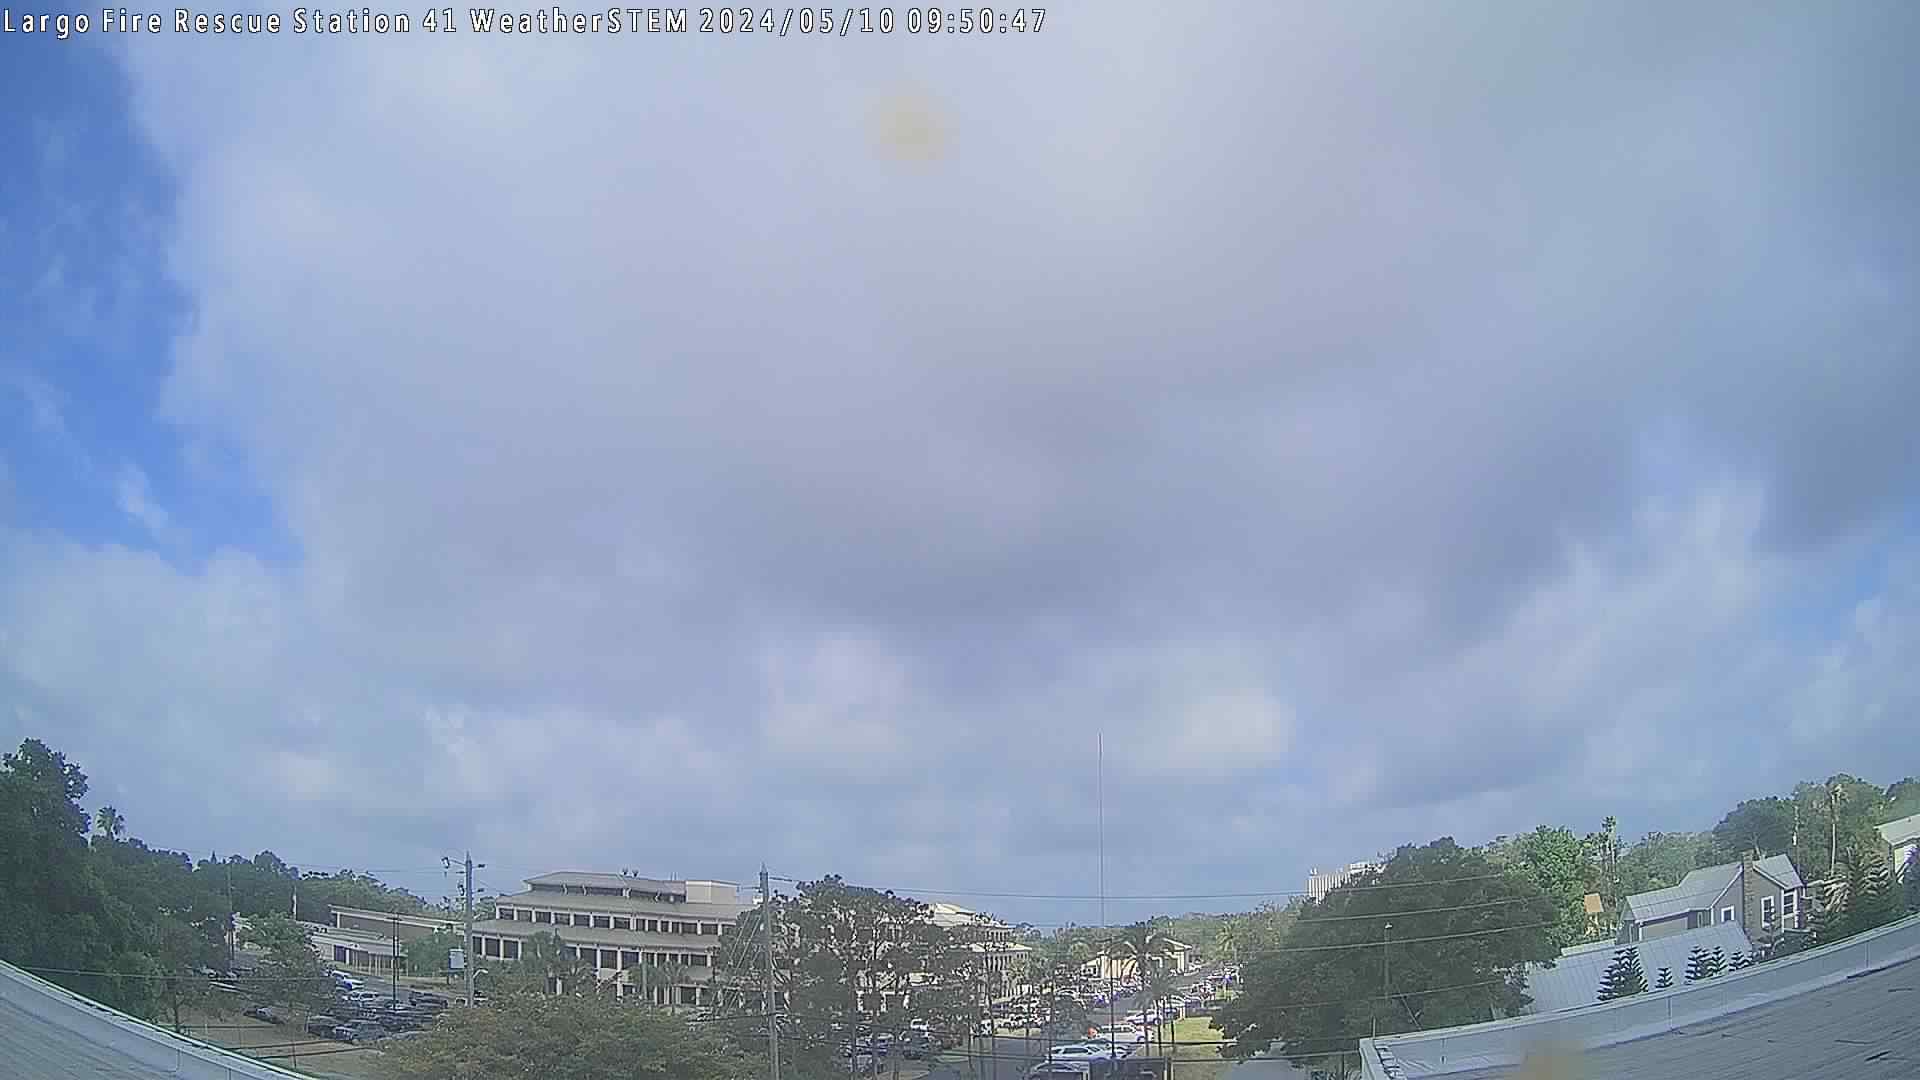  WeatherSTEM Cloud Camera null in Pinellas County, Florida FL at Largo Fire Rescue Station 41